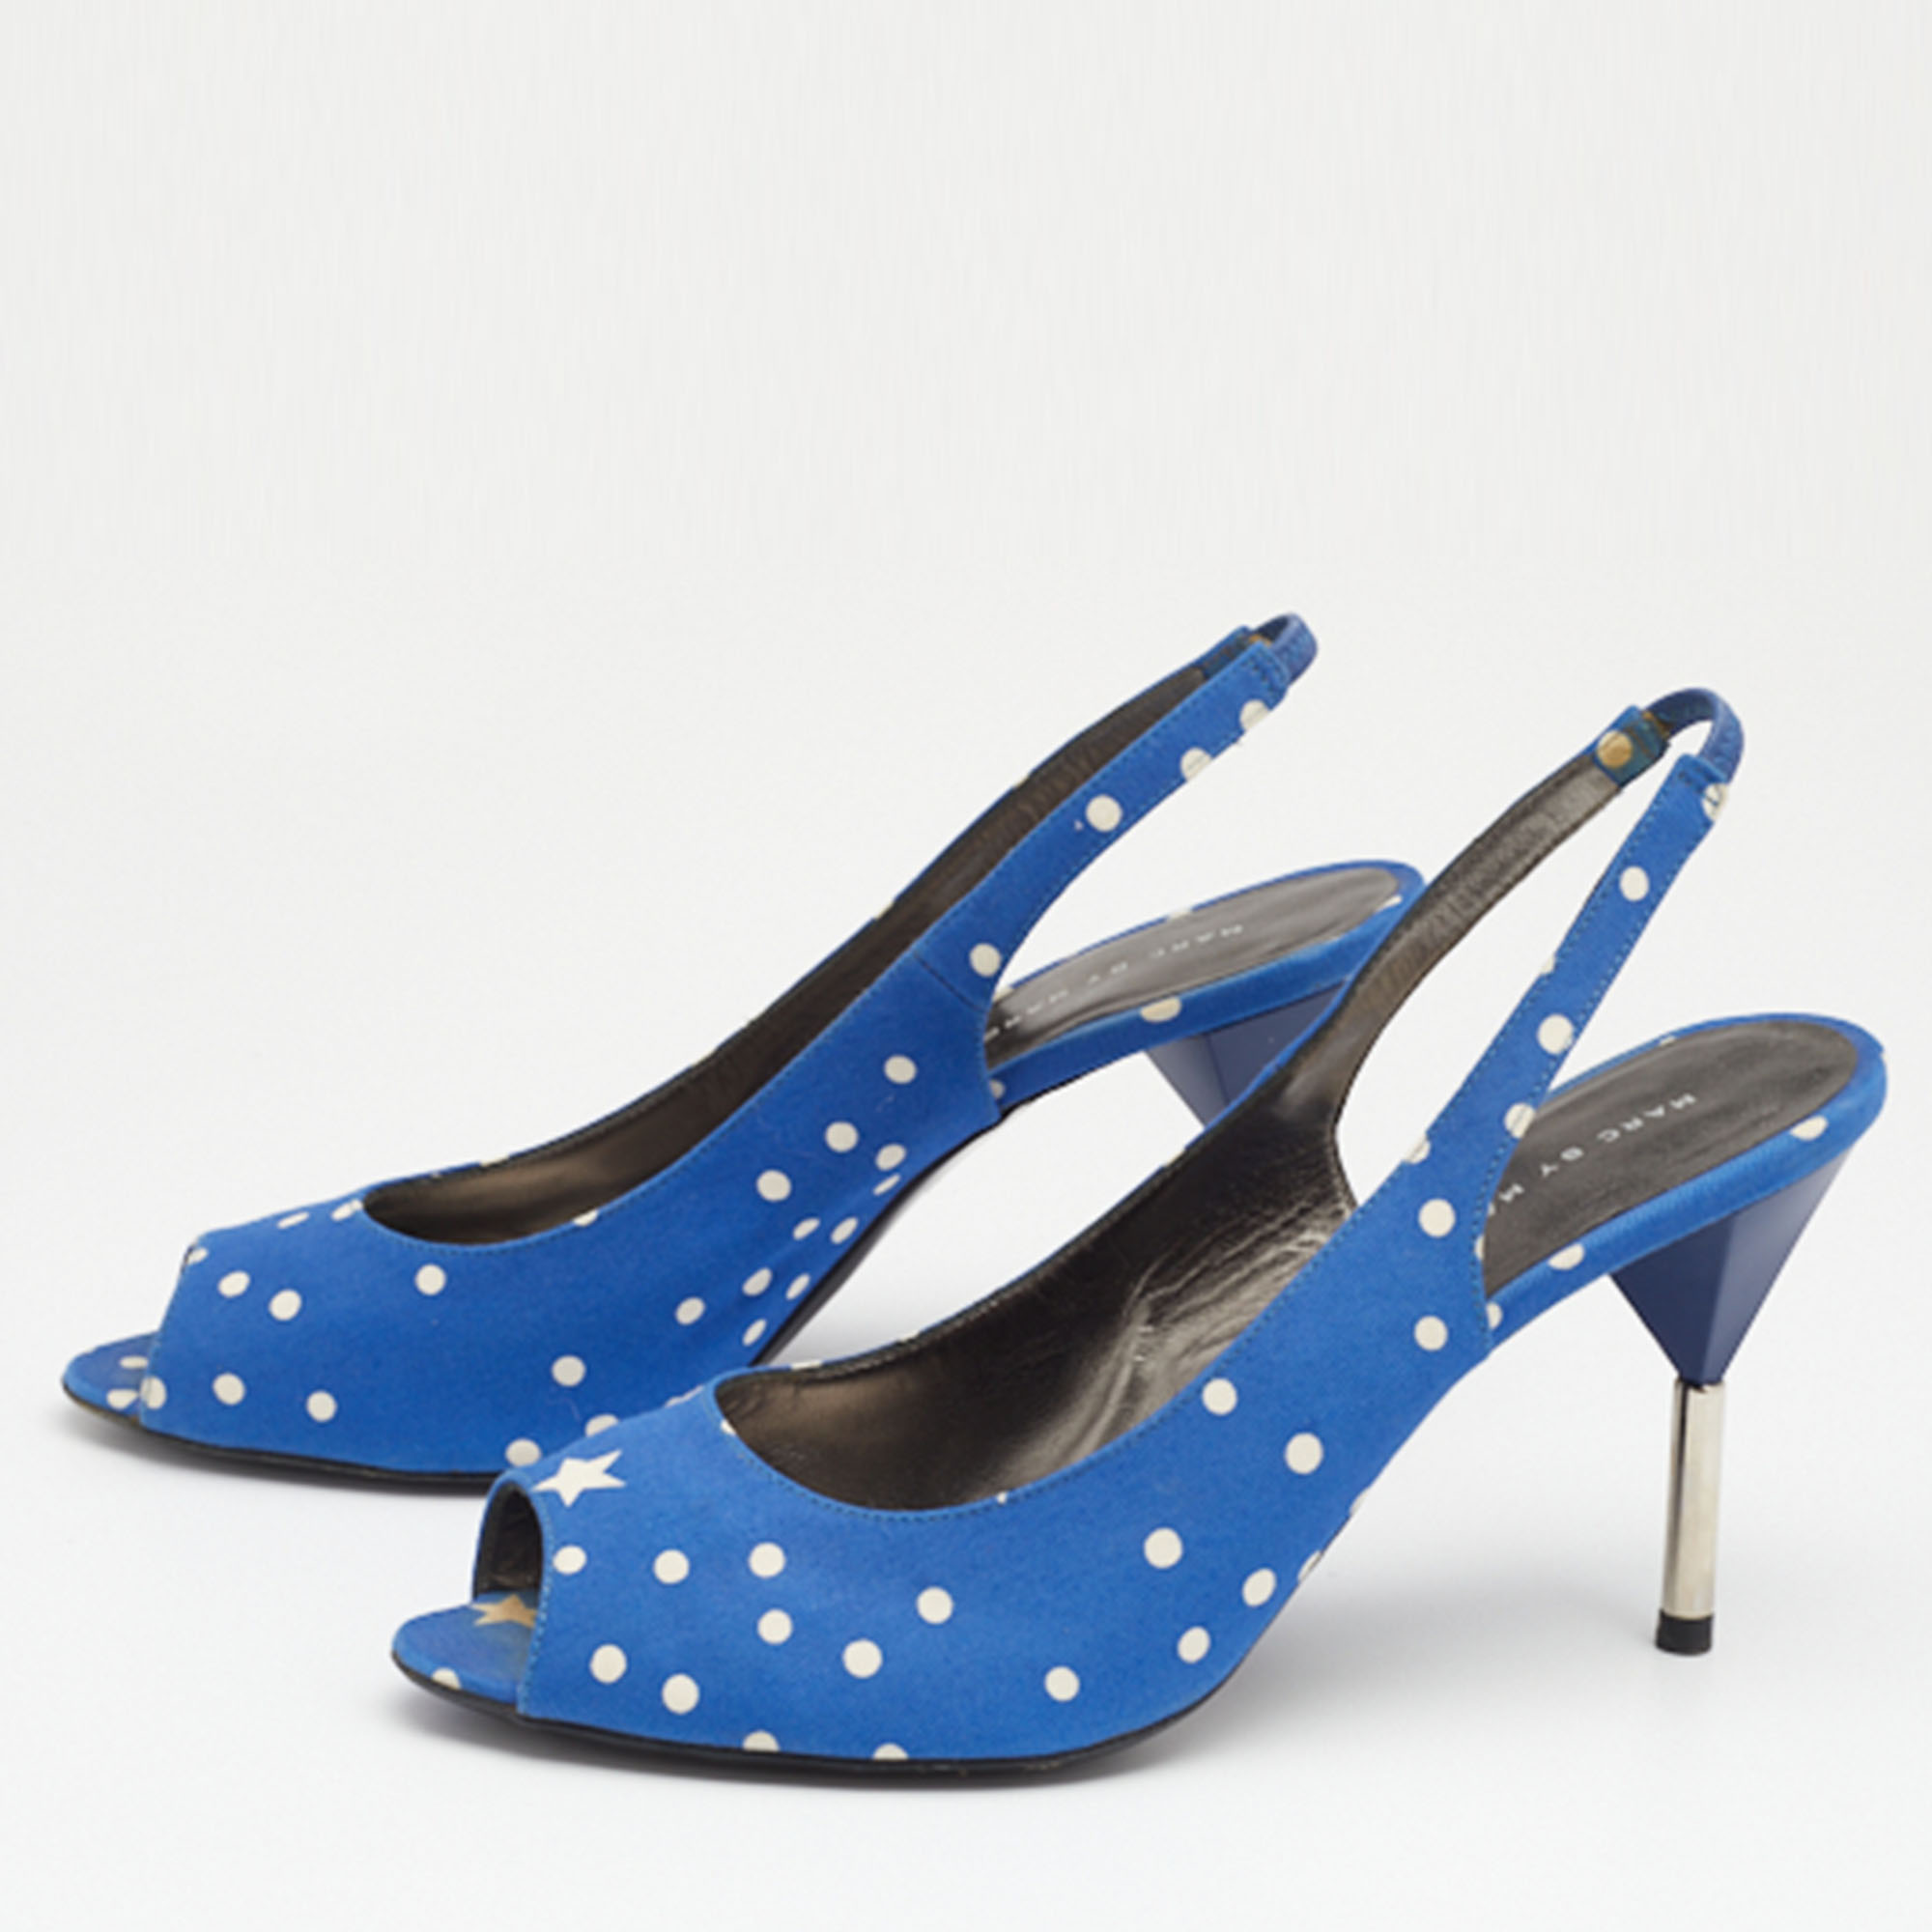 

Marc by Marc Jacobs Blue Polka Dots Fabric Slingback Sandals Size